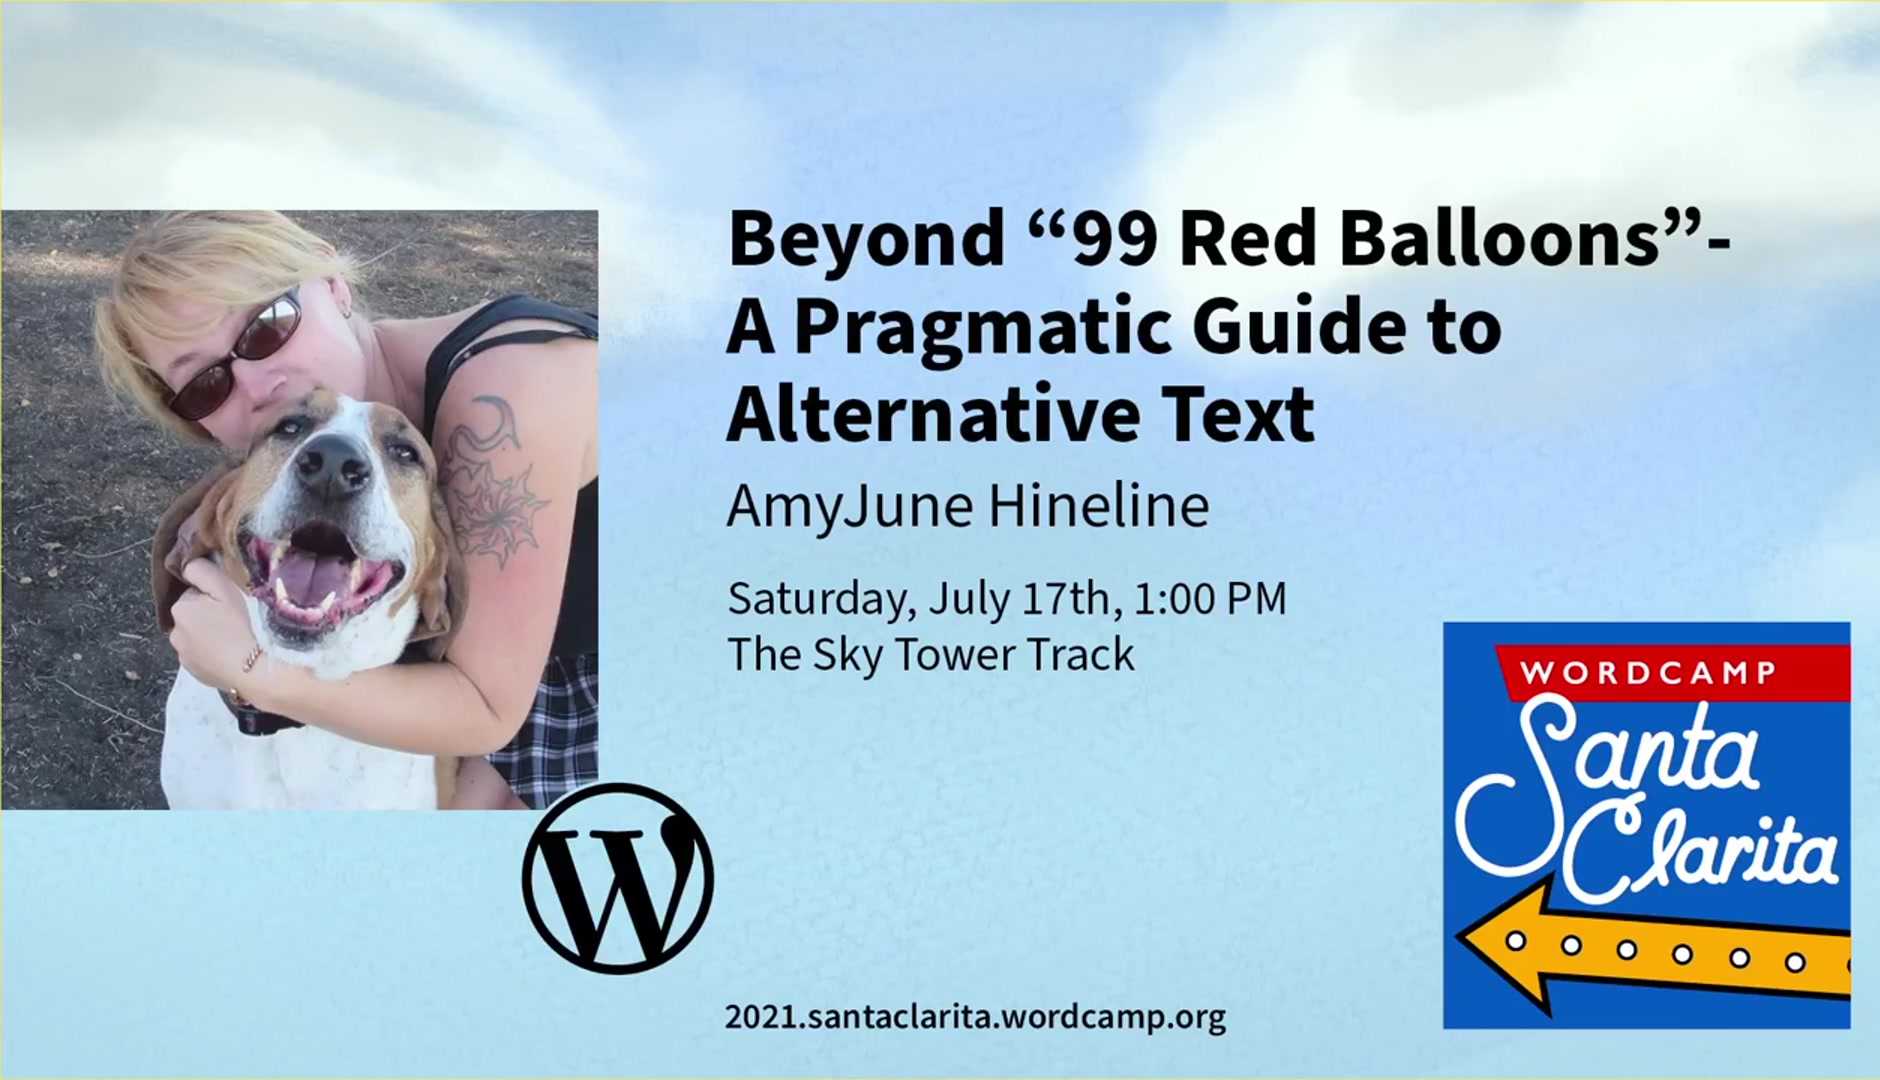 AmyJune Hineline: Beyond “99 Red Balloons” – A Pragmatic Guide to Alternative Text